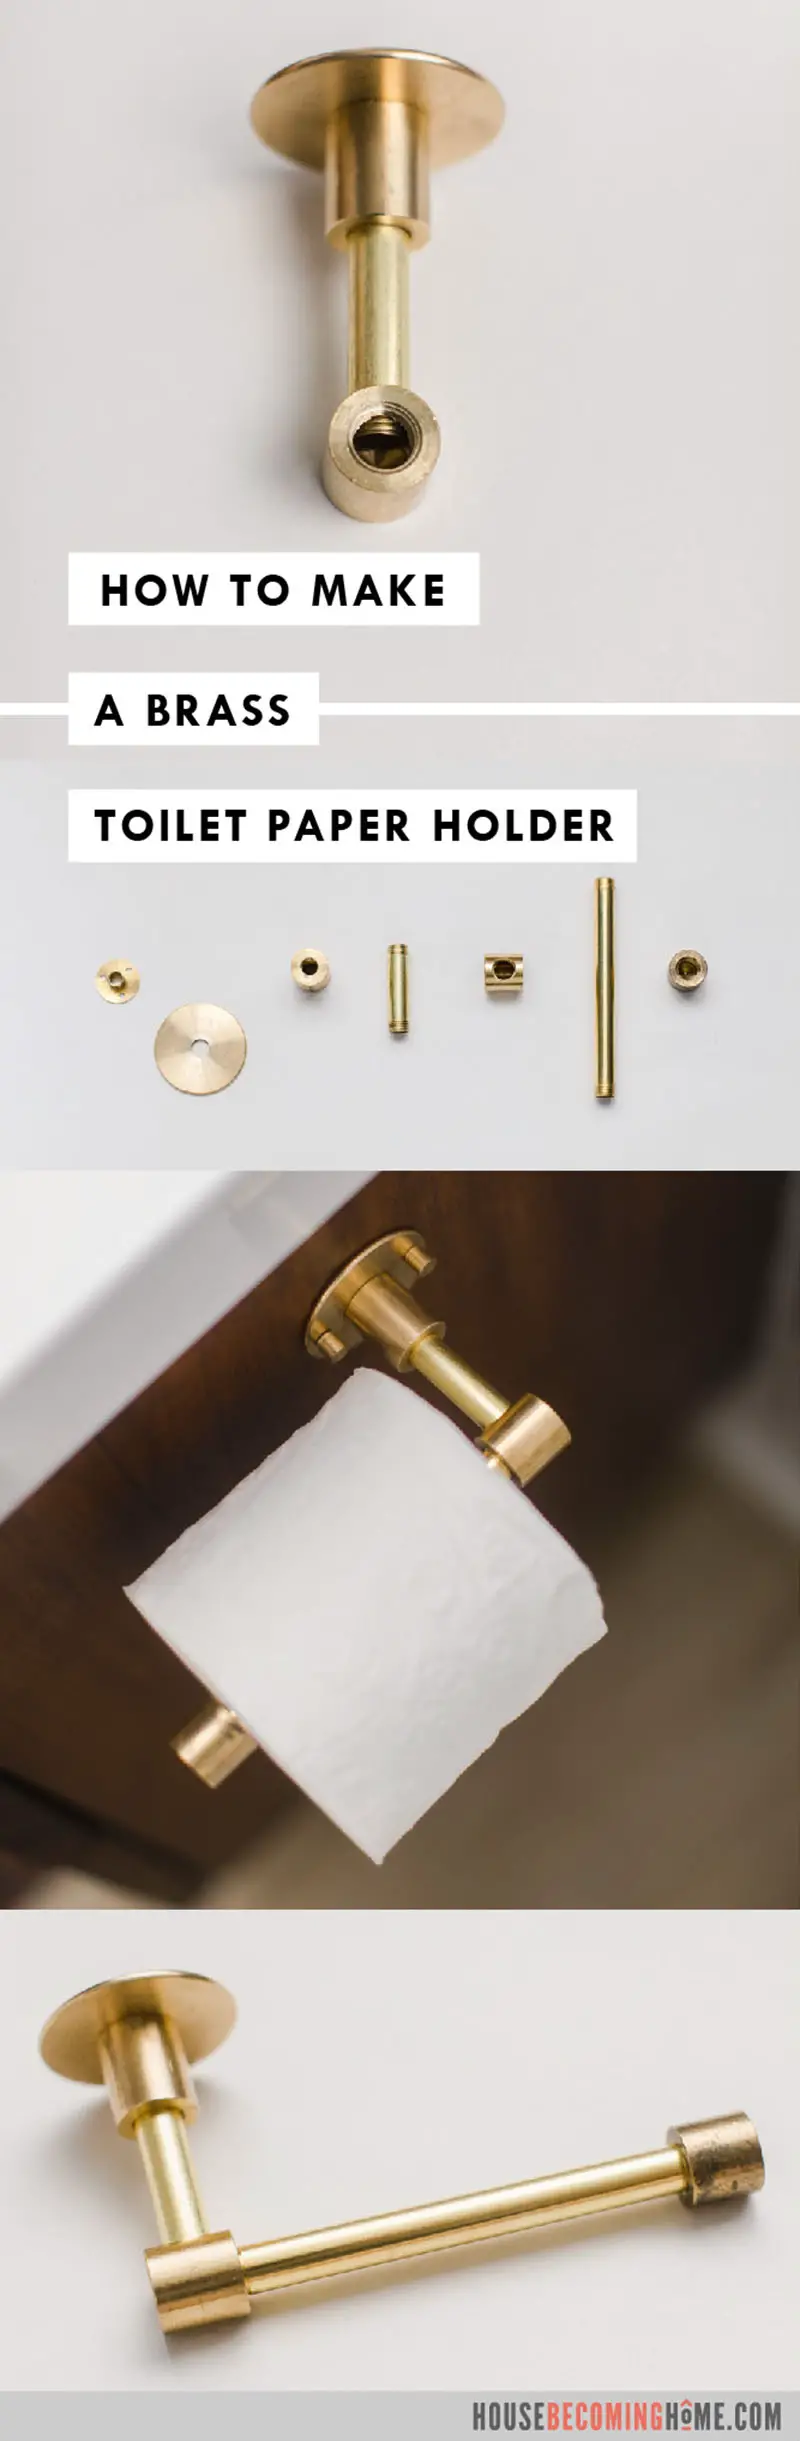 How to Make a Brass Toilet Paper Holder. Supply list and step by step instructions on House Becoming Home